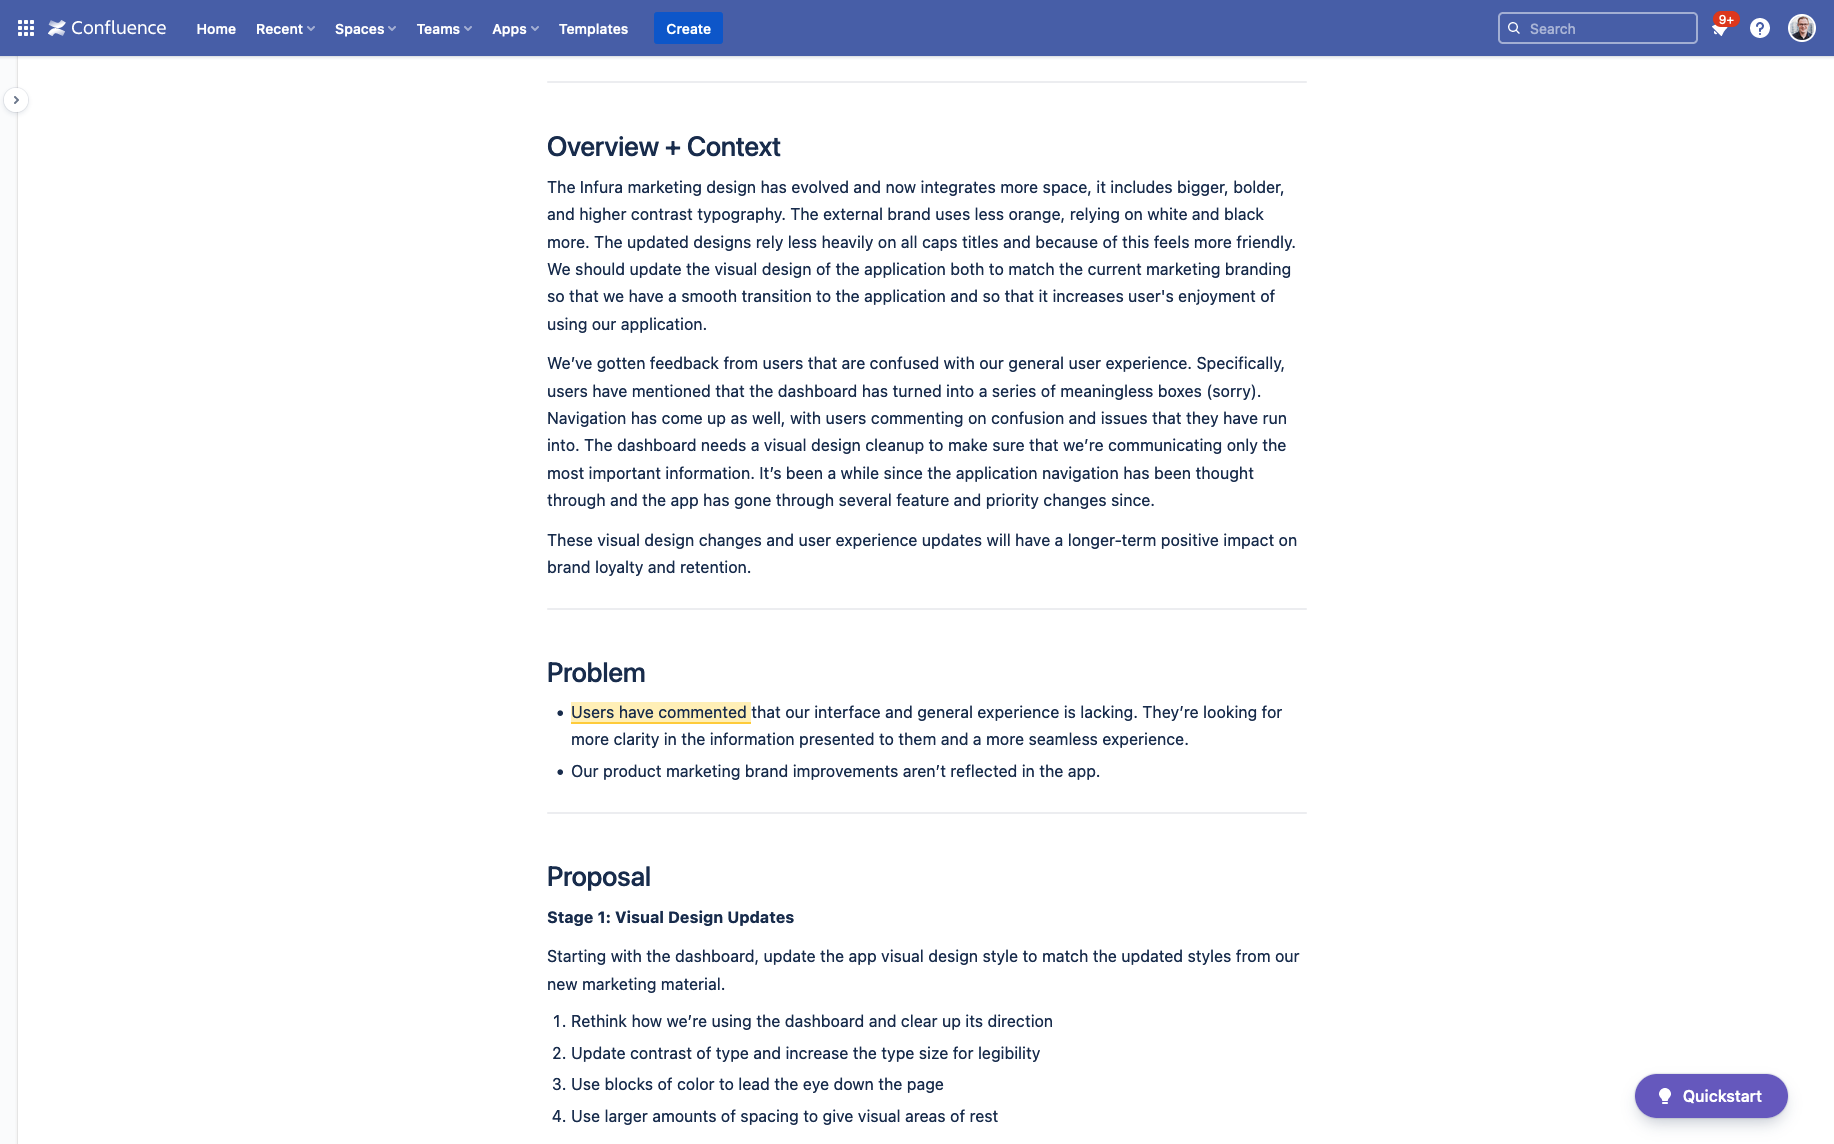 Screenshot of the project proposal in Confluence